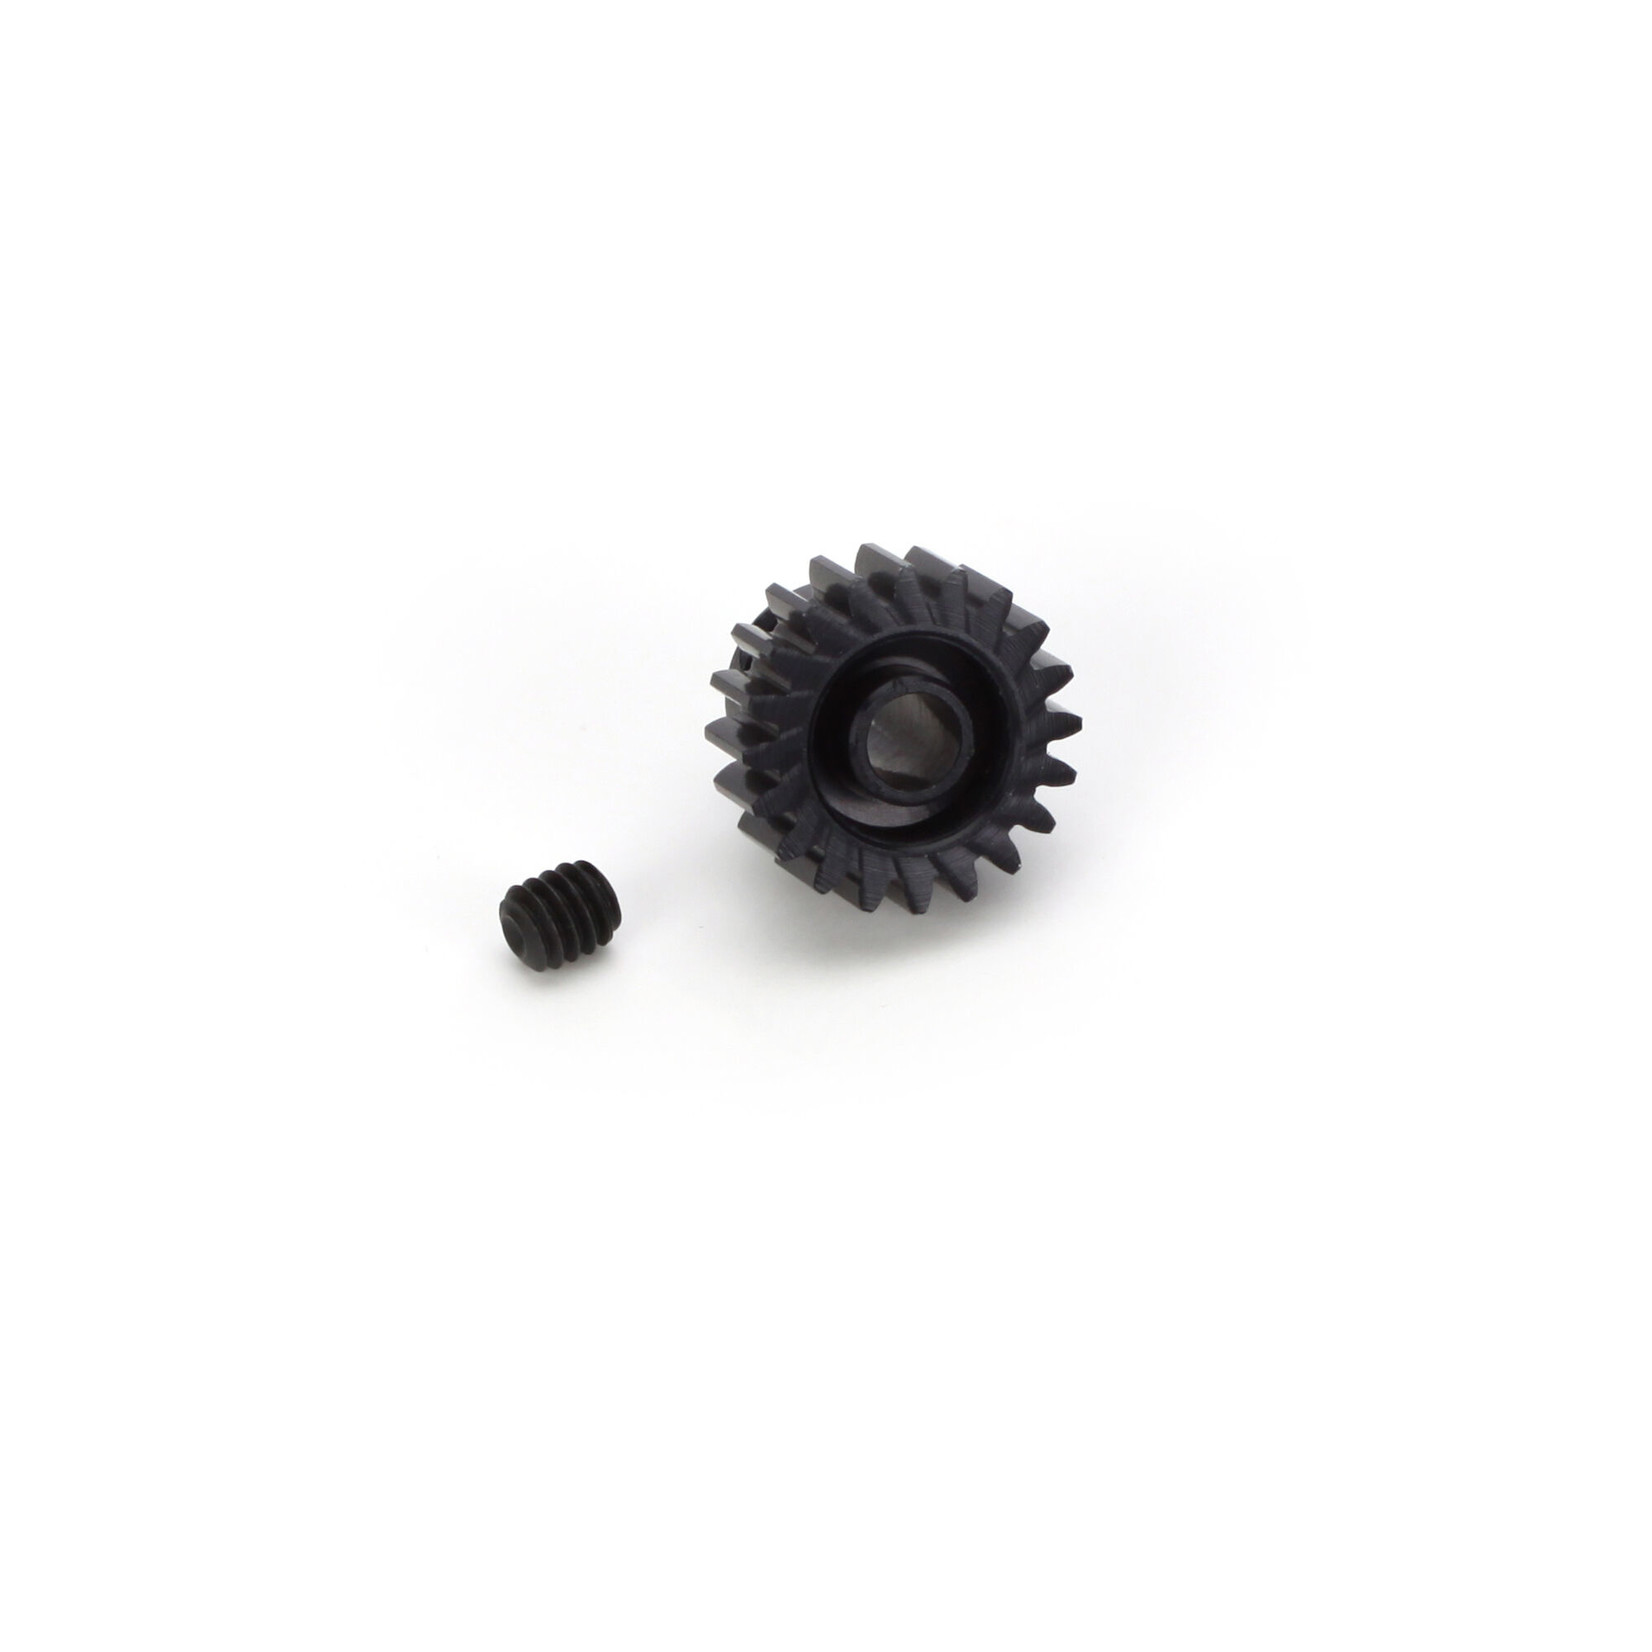 Robinson Racing Products (RRP) 48P Hard Coated Aluminum Pinion Gear, 20T